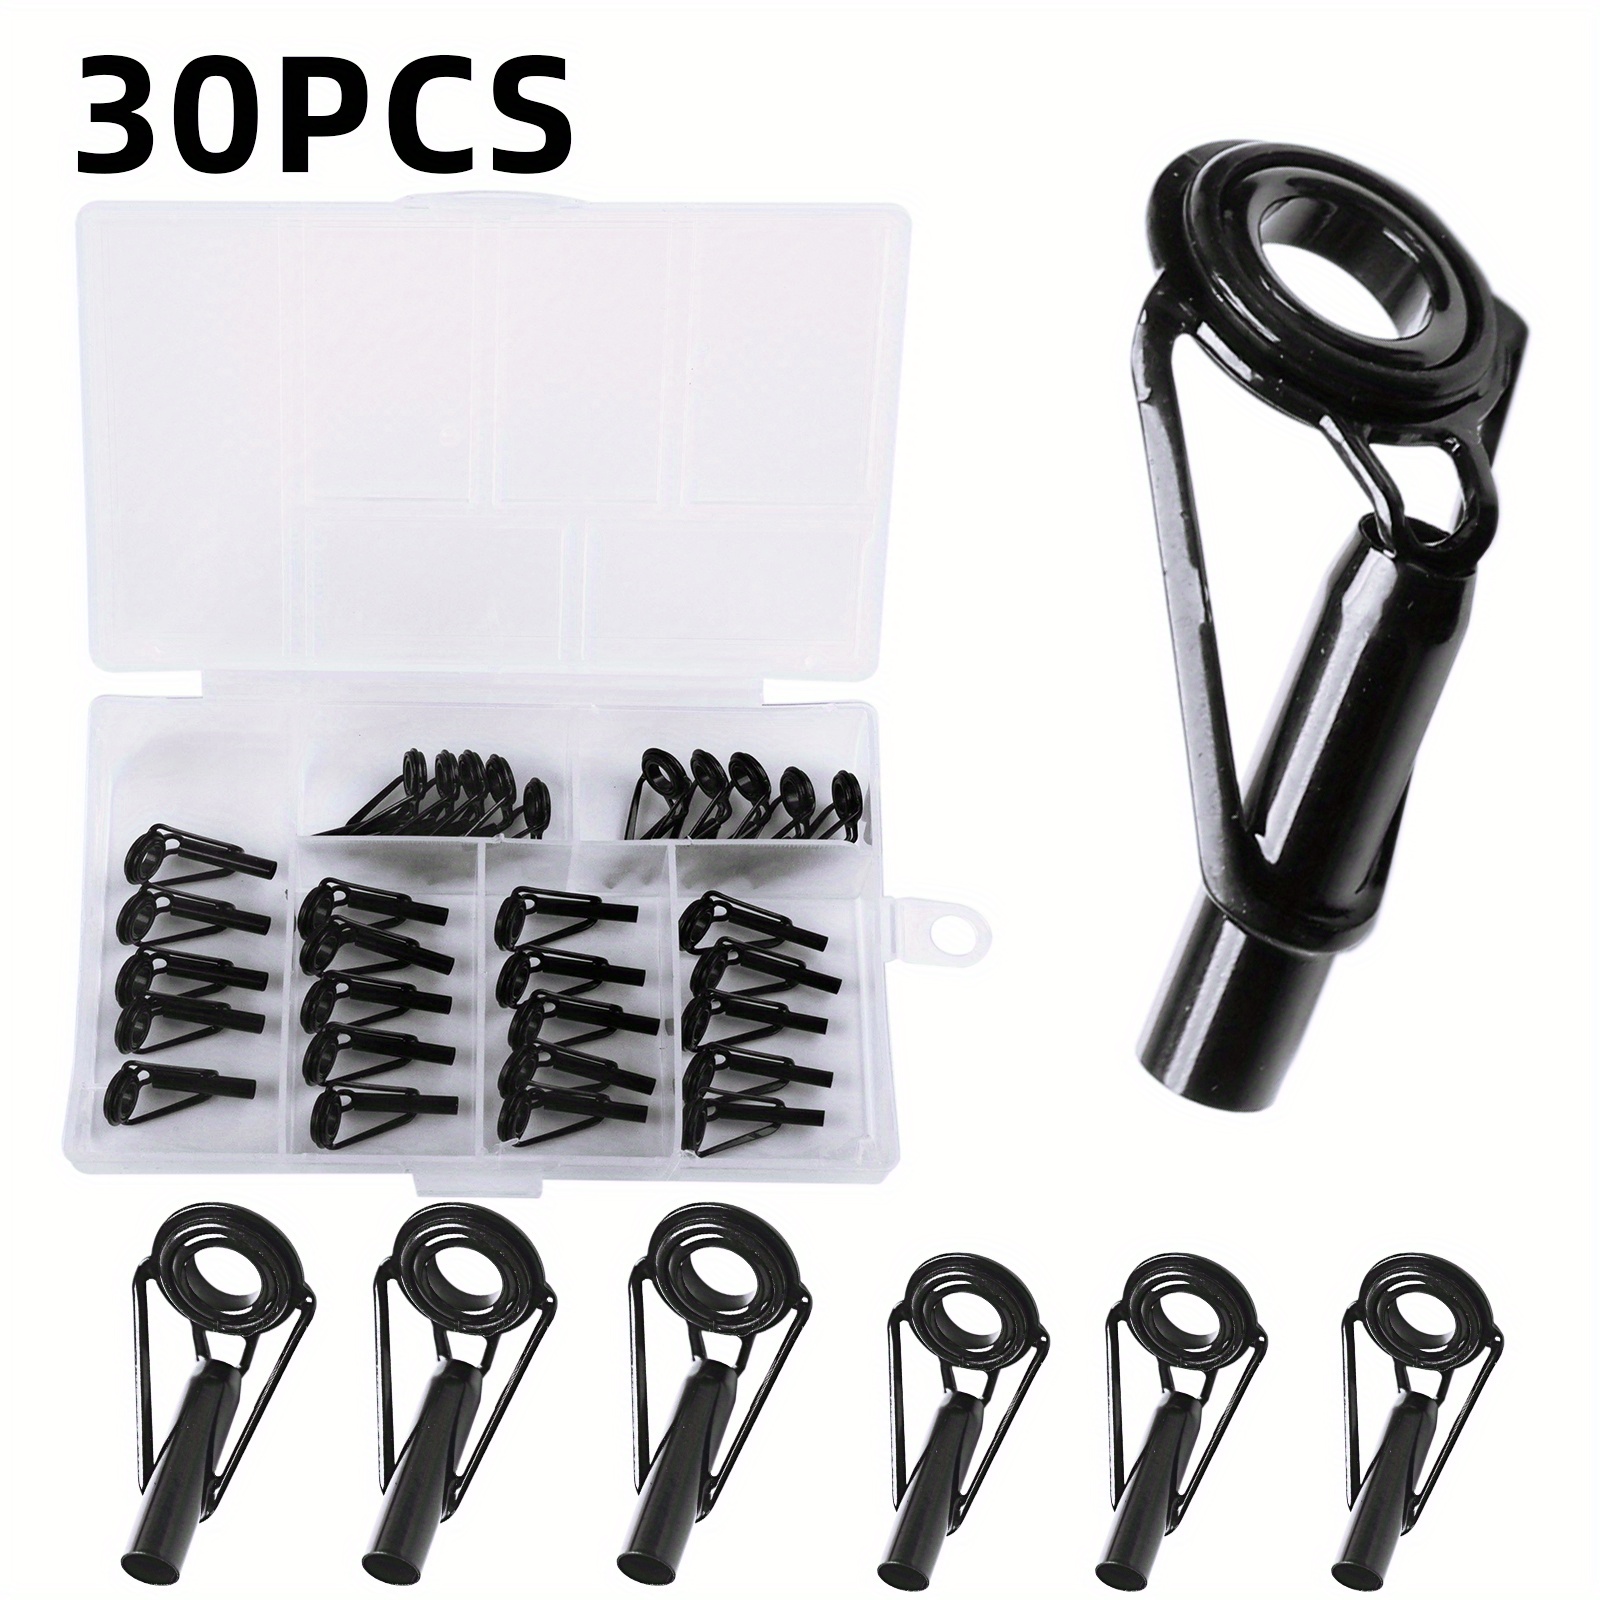 8pcs Fishing Rod Tip Repair Kit Rod Top Tips Replacement Fishing Rod Tips  Stainless Steel Ceramic Ring Guide Tips